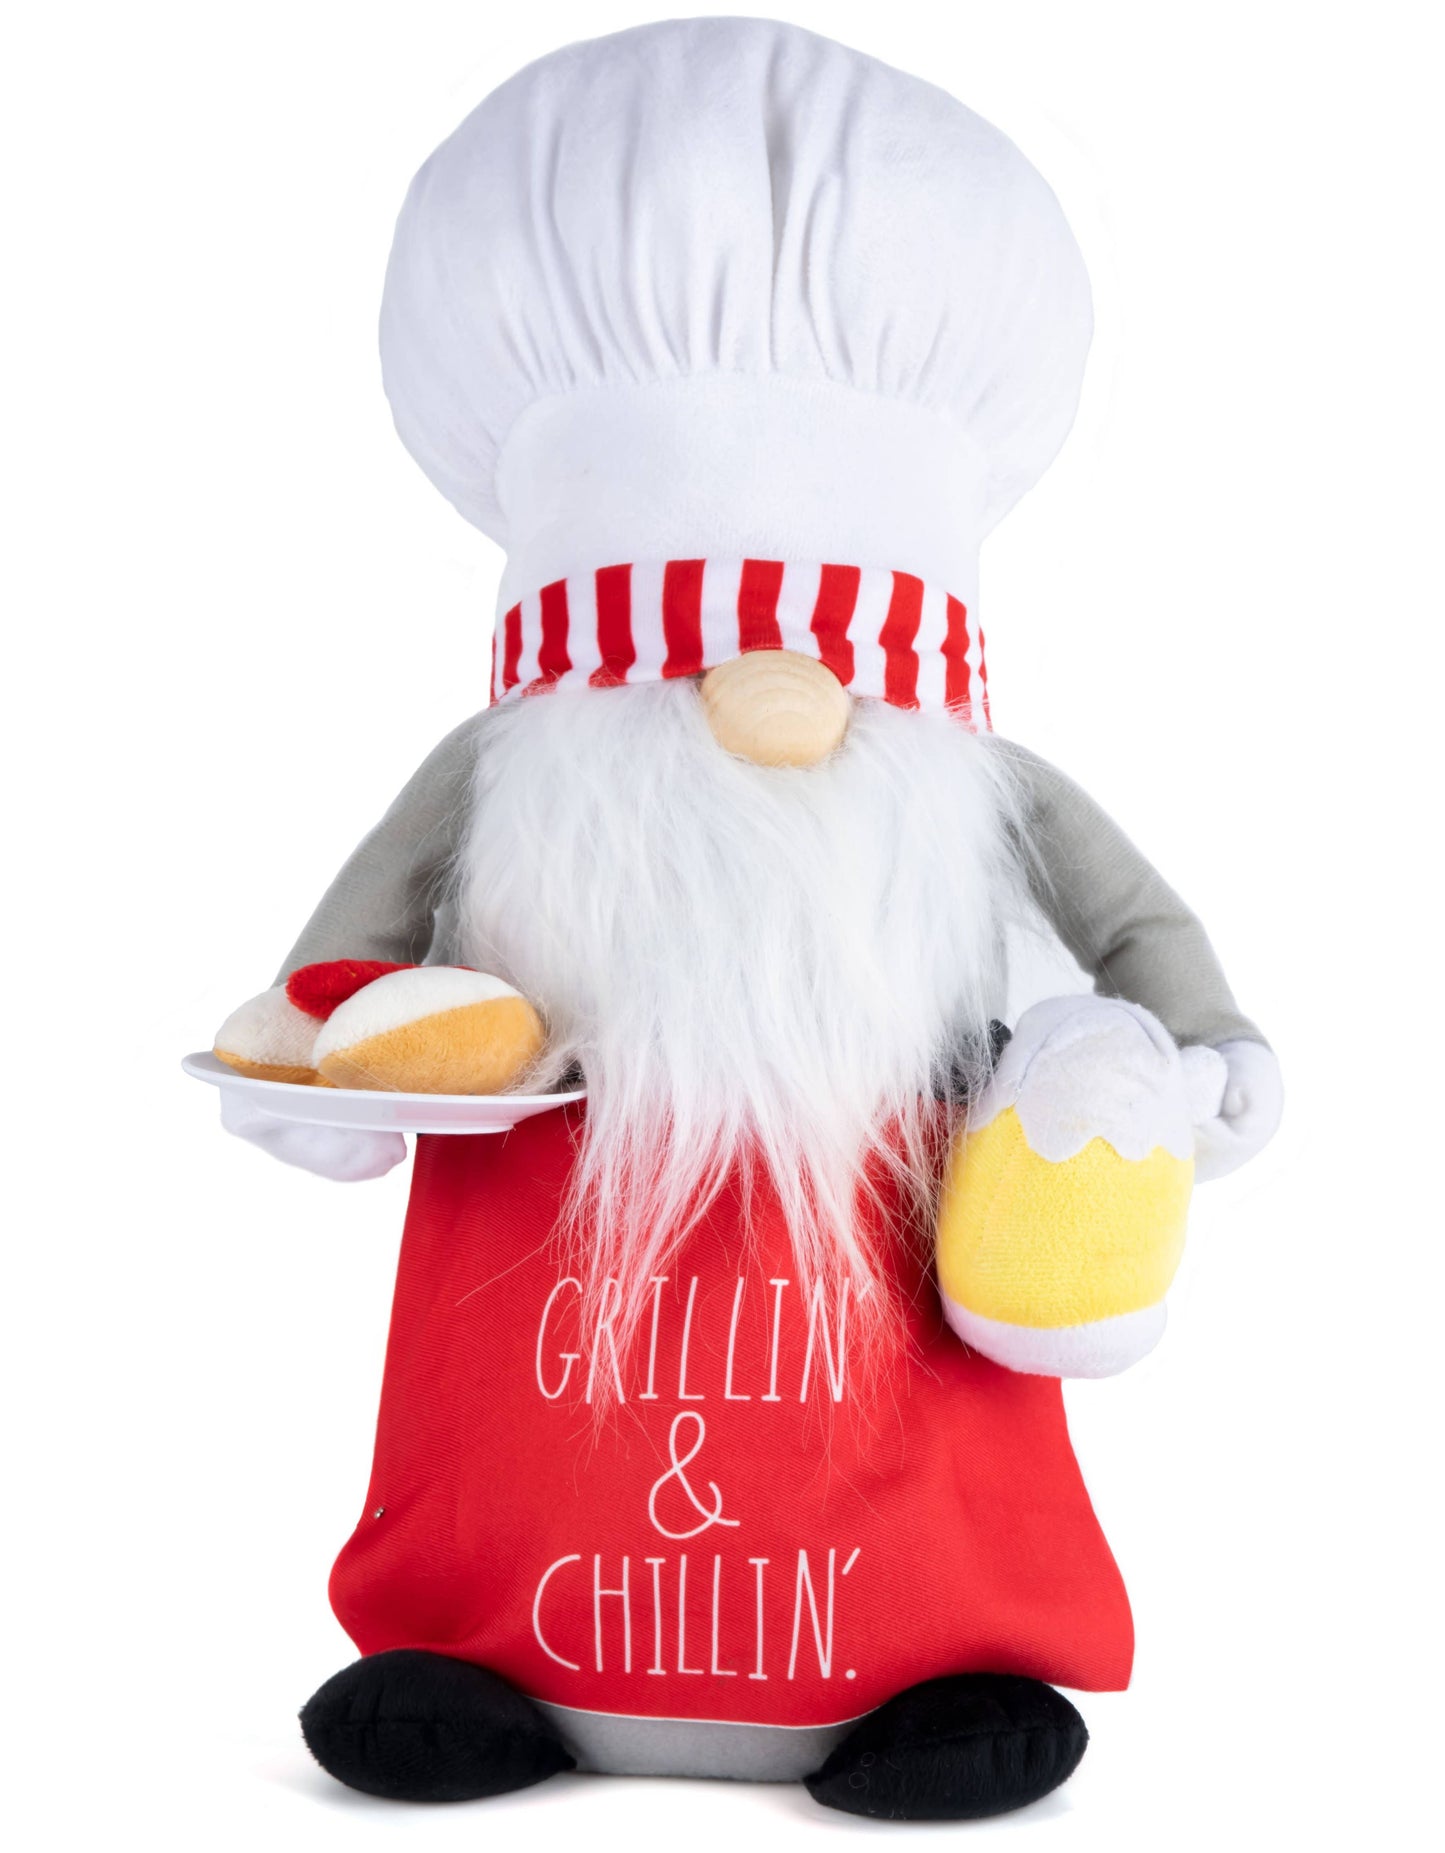 Rae Dunn “Grillin’ and Chillin’” Barbecue Chef Beer Gnome